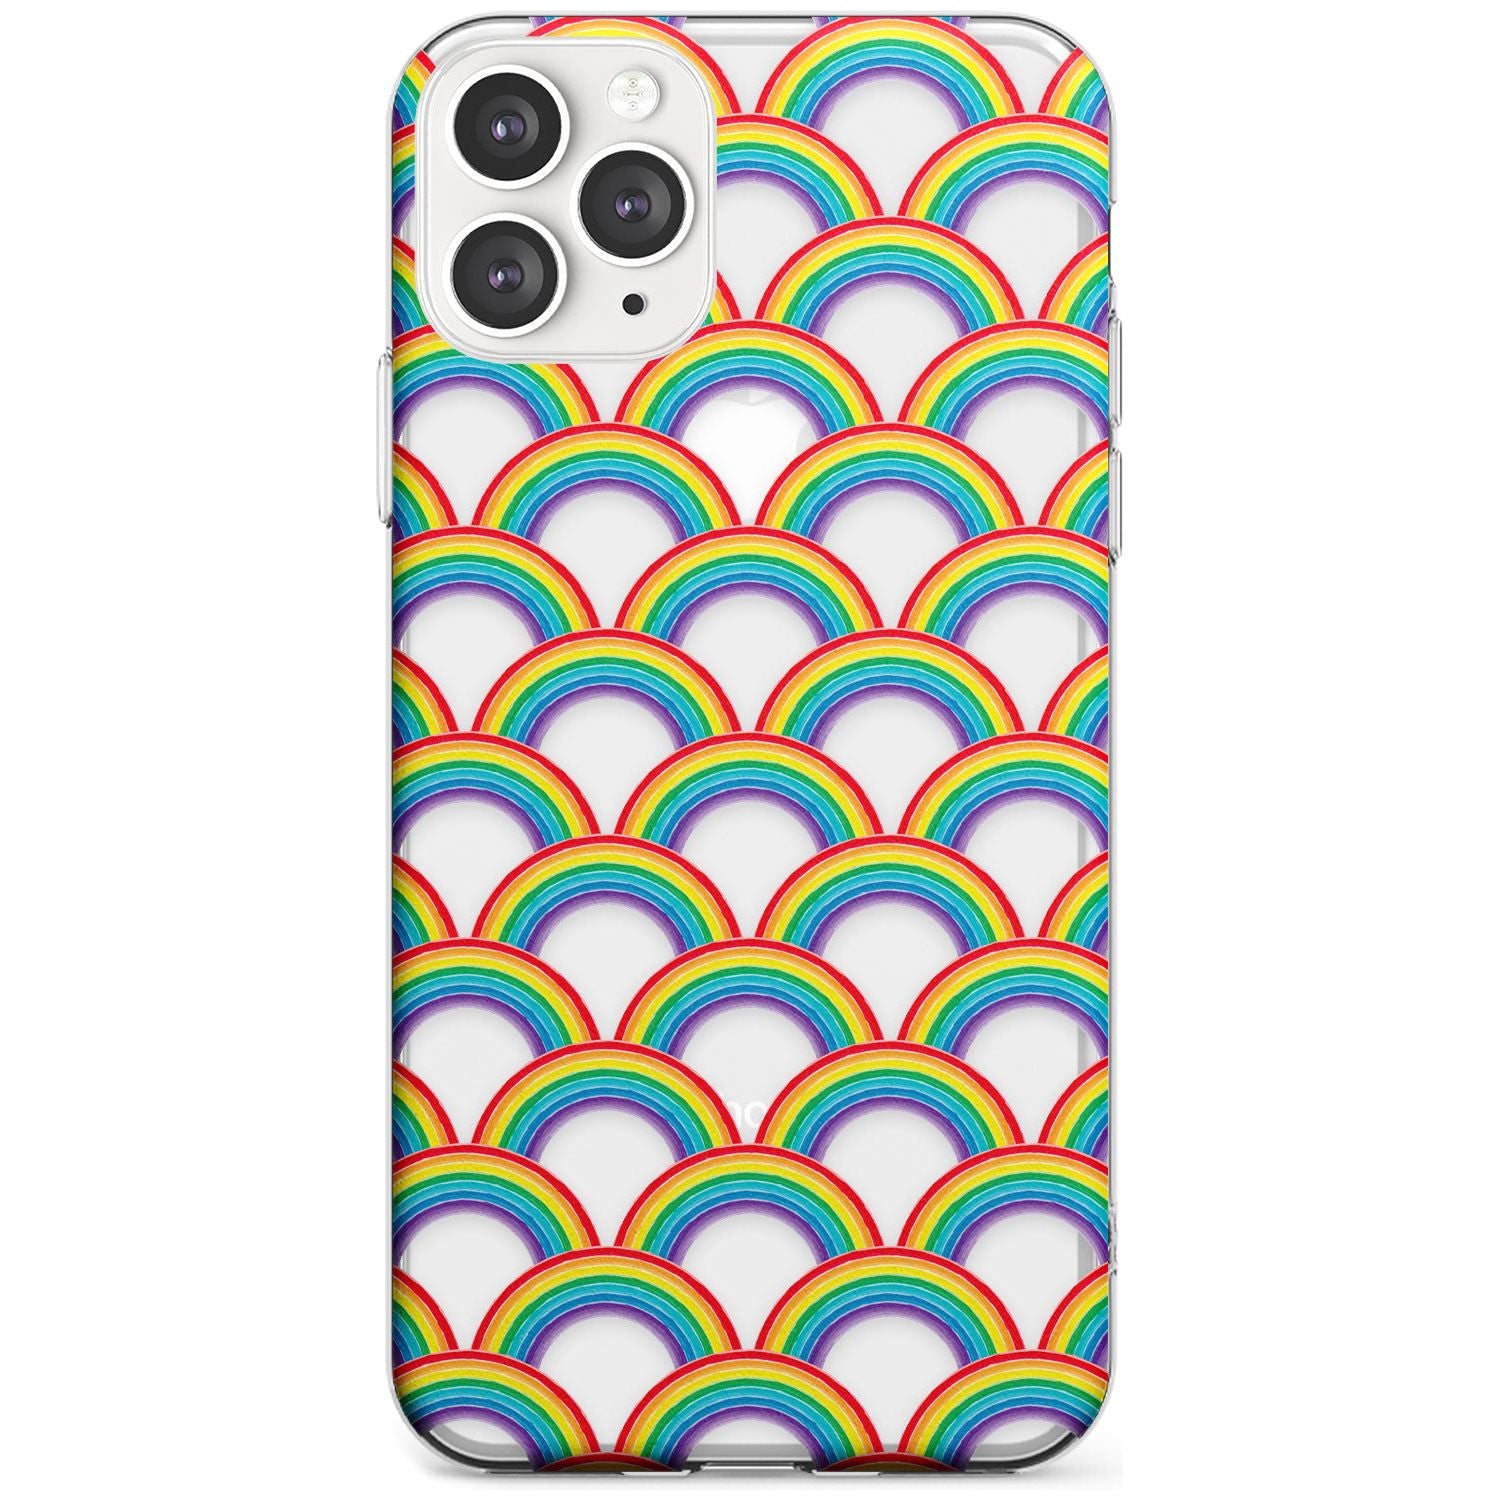 Somewhere over the rainbow Slim TPU Phone Case for iPhone 11 Pro Max